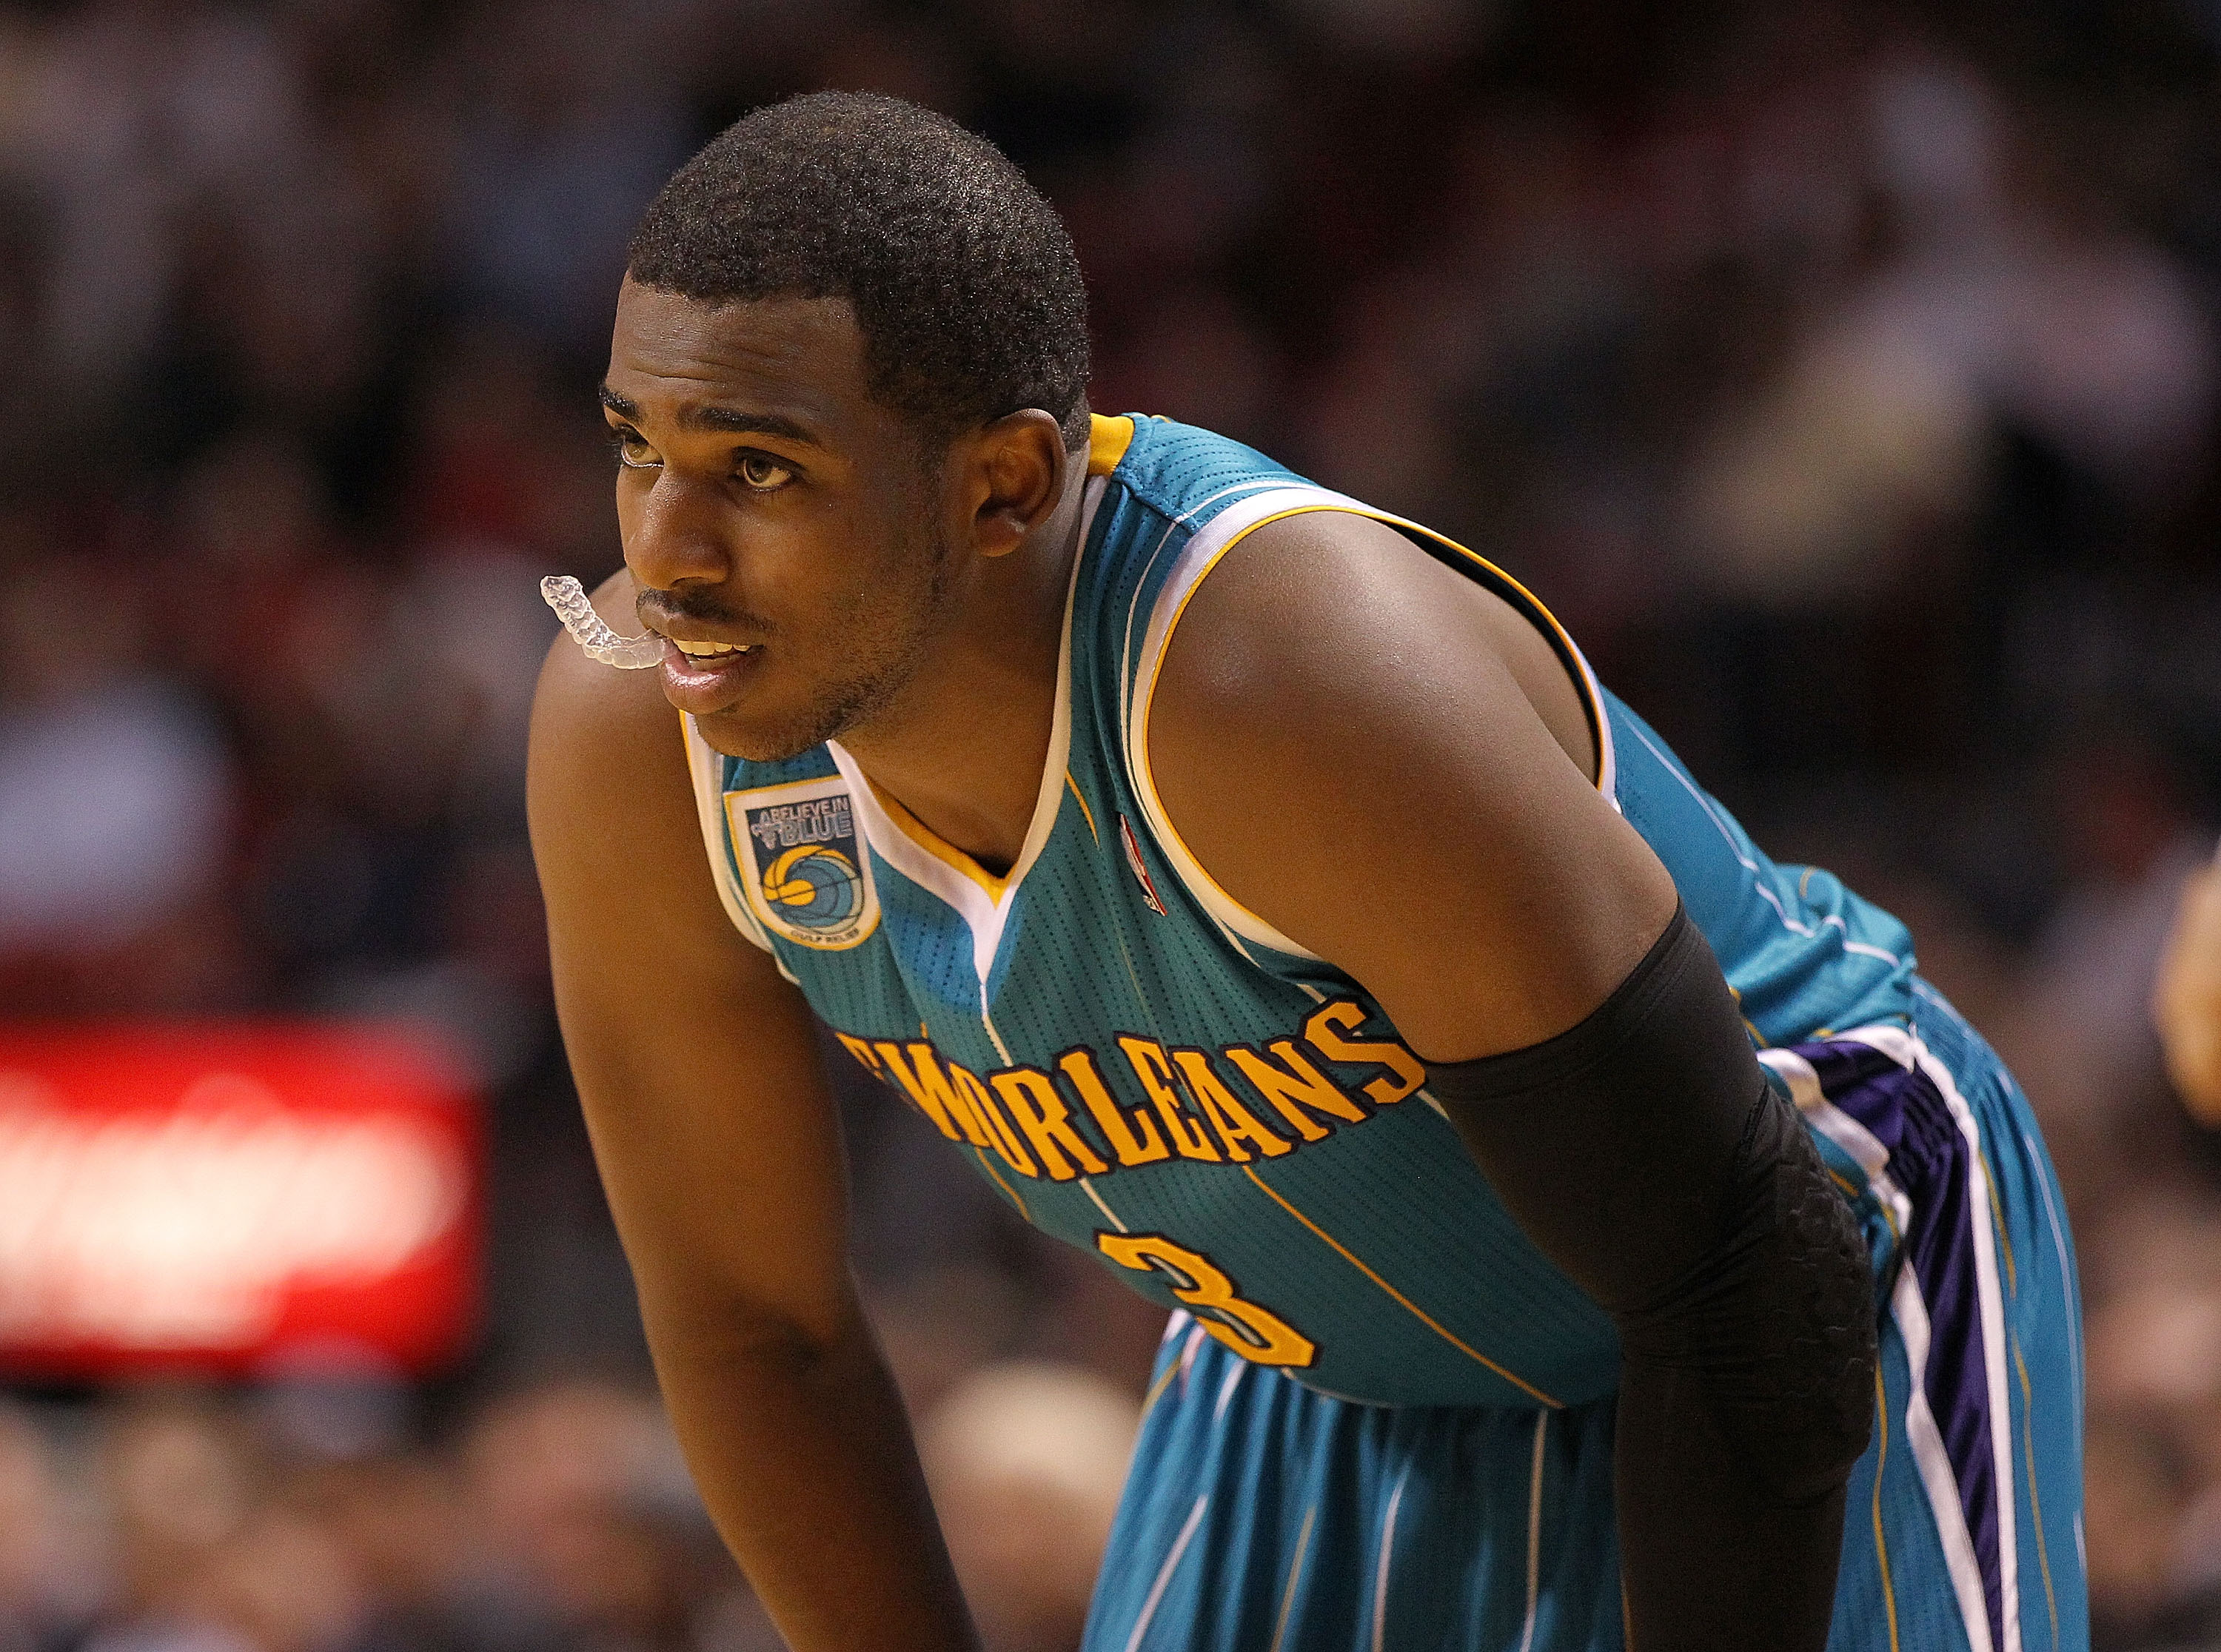 MIAMI, FL - DECEMBER 13: Chris Paul #3 of the New Orleans Hornets waits during a foul shot during a game against the Miami Heat at American Airlines Arena on December 13, 2010 in Miami, Florida. NOTE TO USER: User expressly acknowledges and agrees that, b